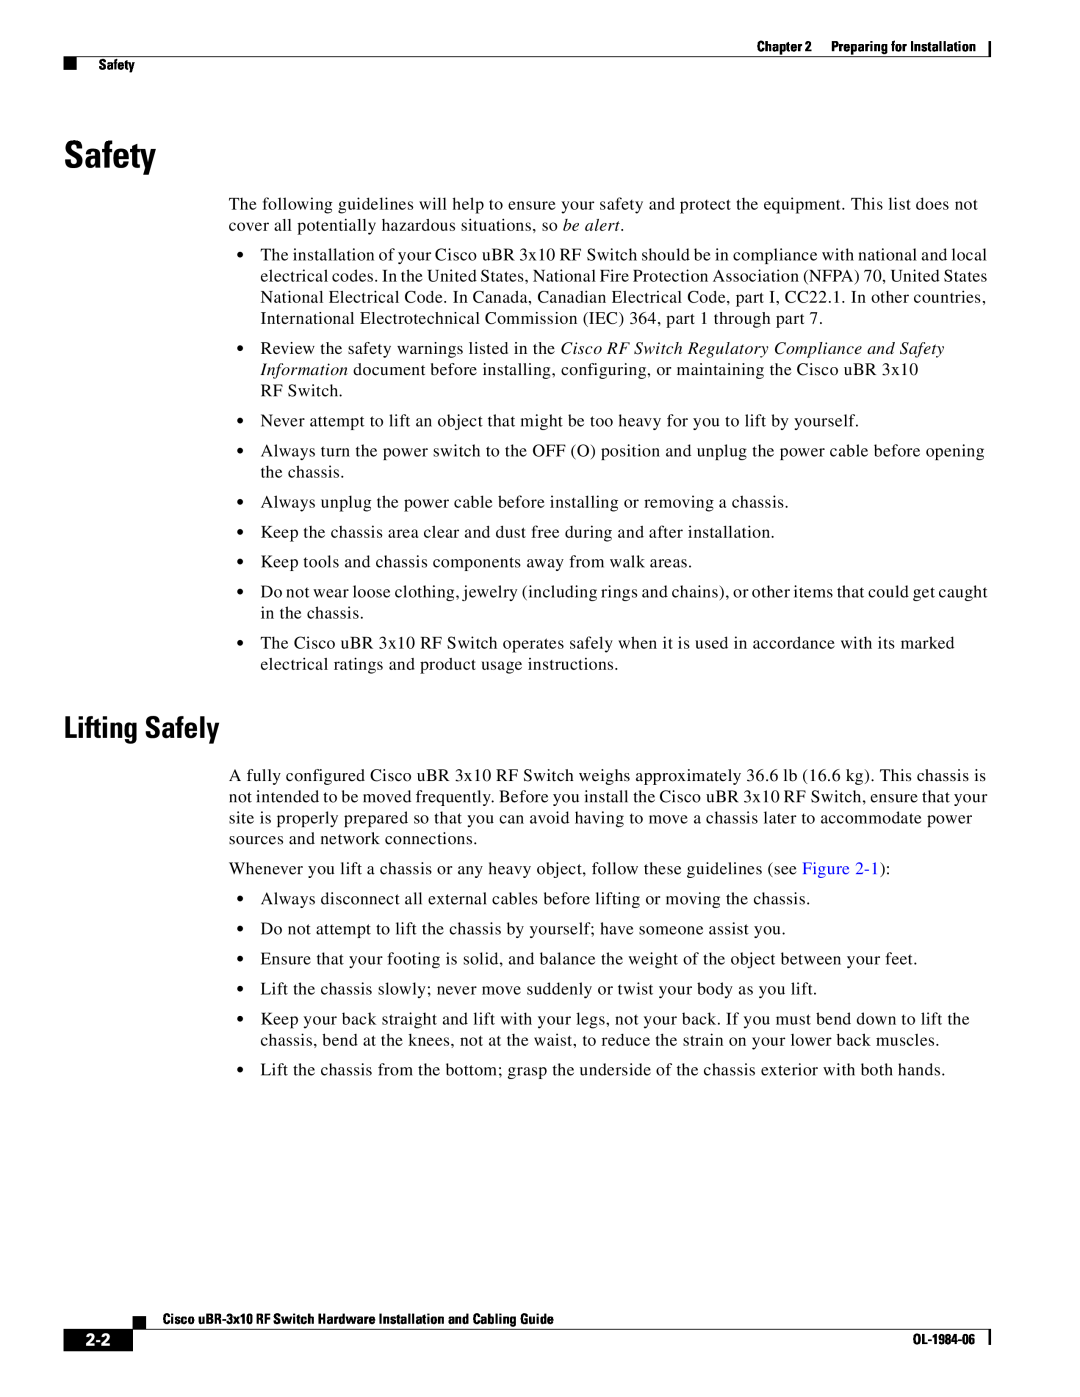 Cisco Systems UBR-3X10 manual Safety, Lifting Safely 